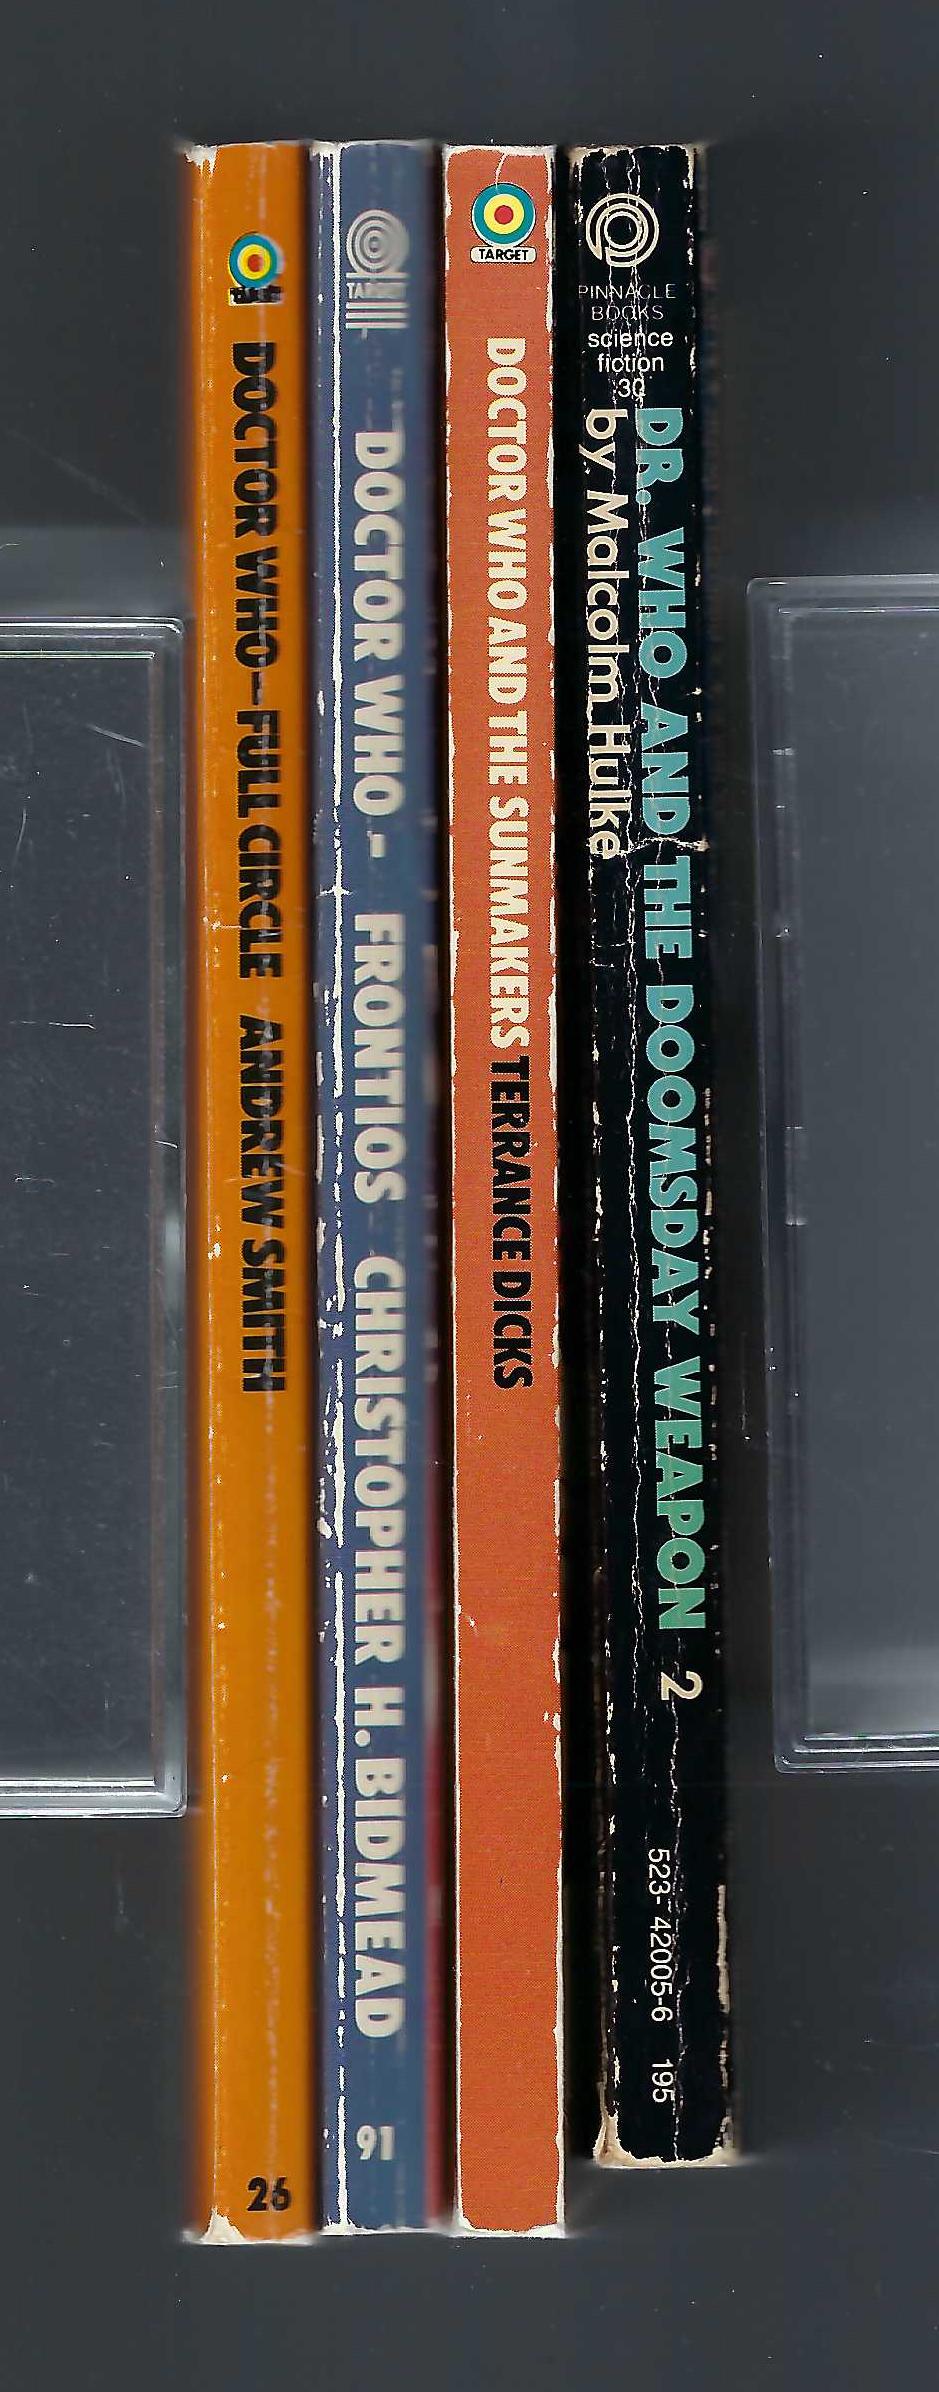 Doctor Who Frontios by Christopher H. Bidmead spine and three other books that are not included